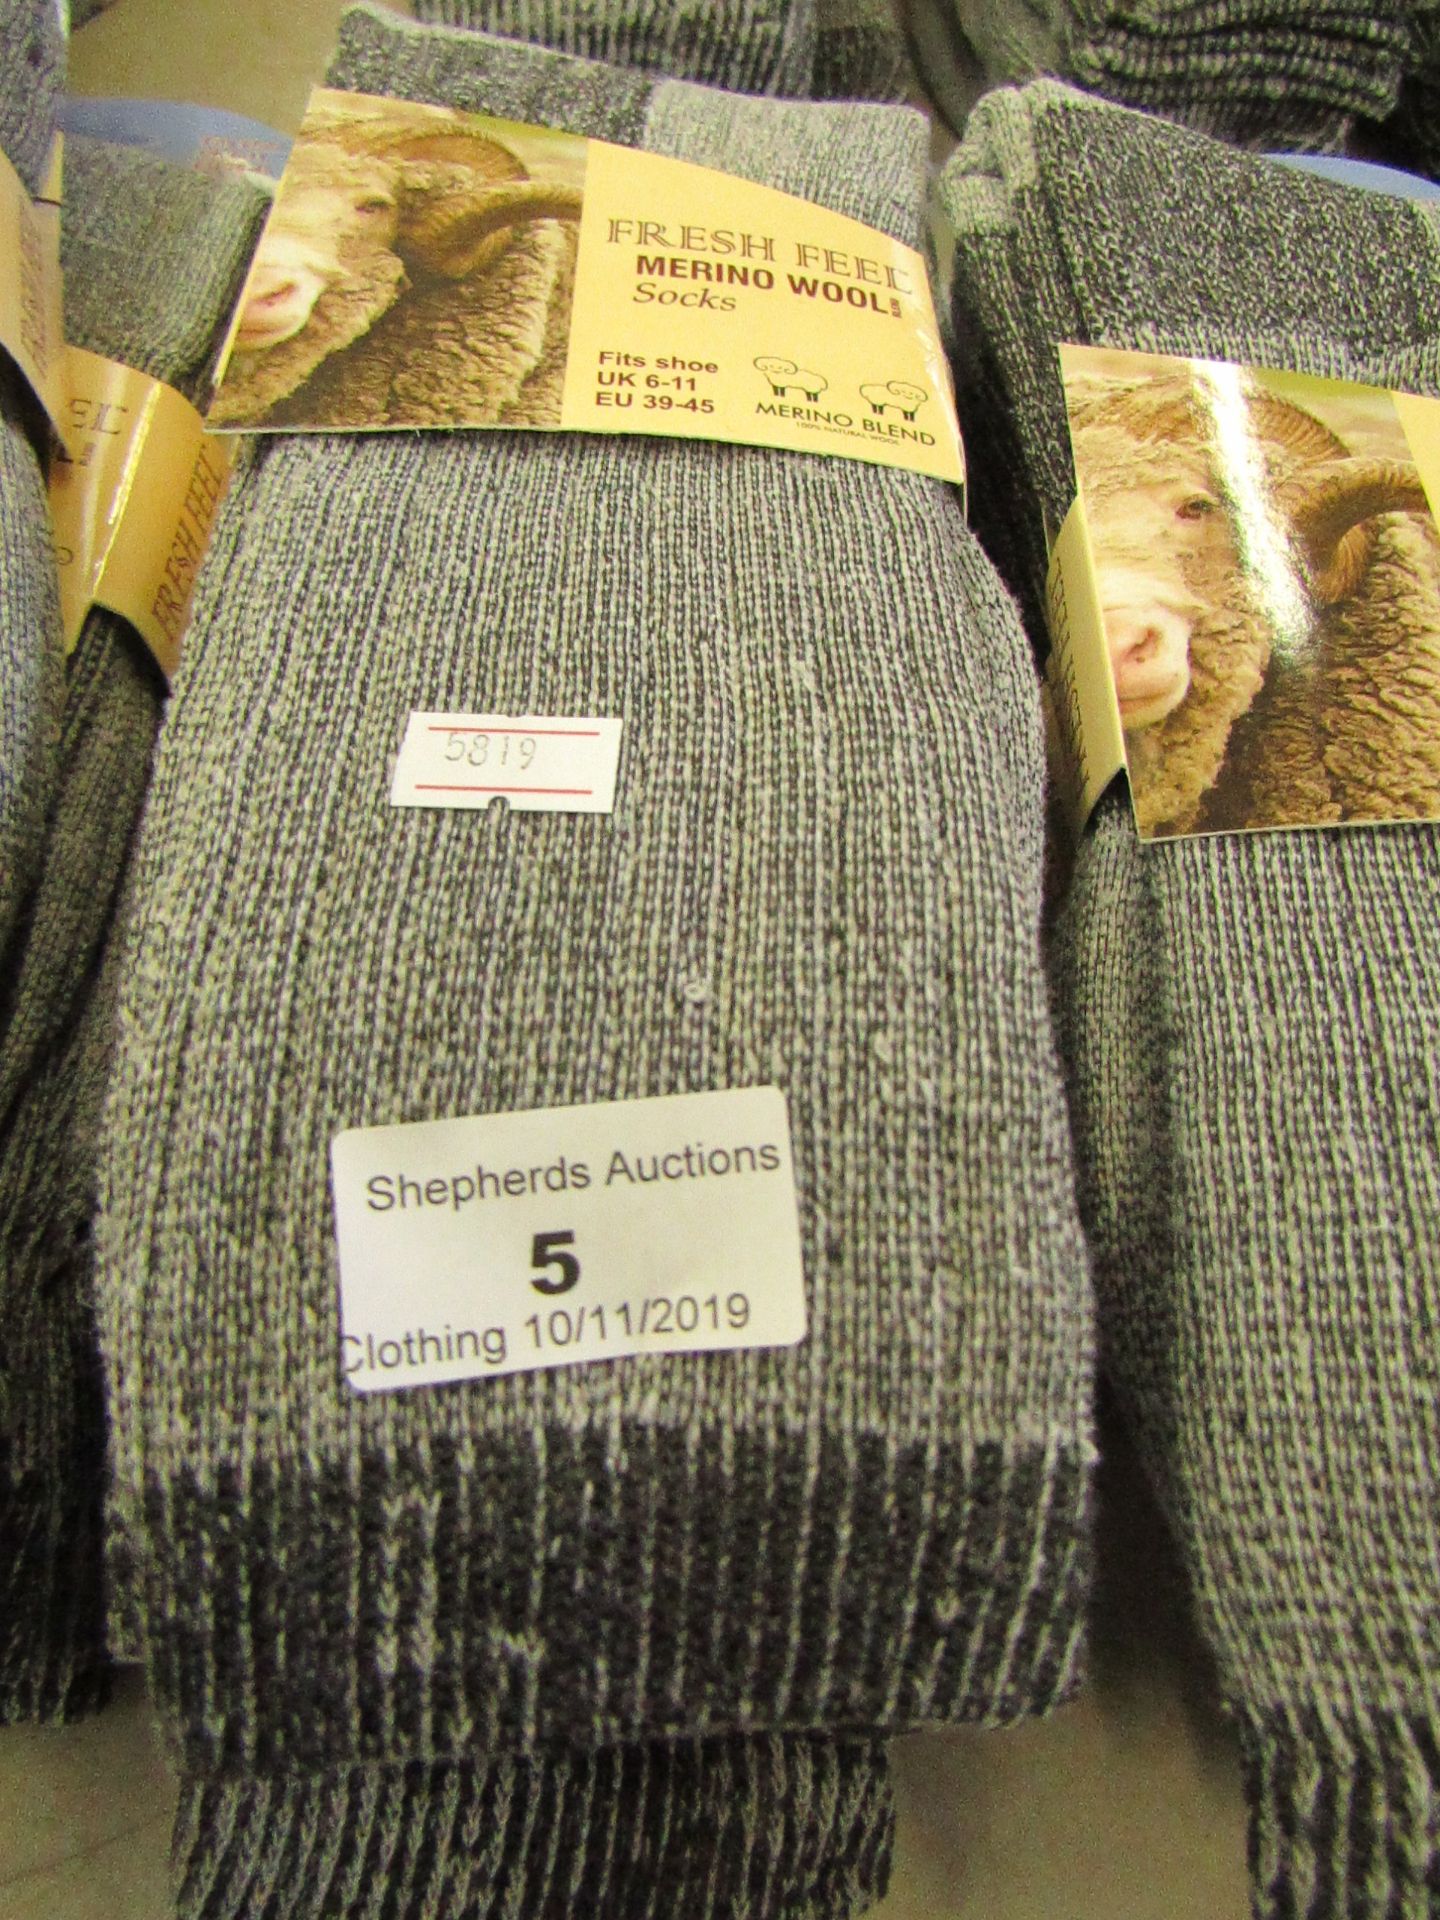 4 X Pairs of Mens Fresh Feel Merino Wool Rich Boot Socks size 6-11 all new in packaging